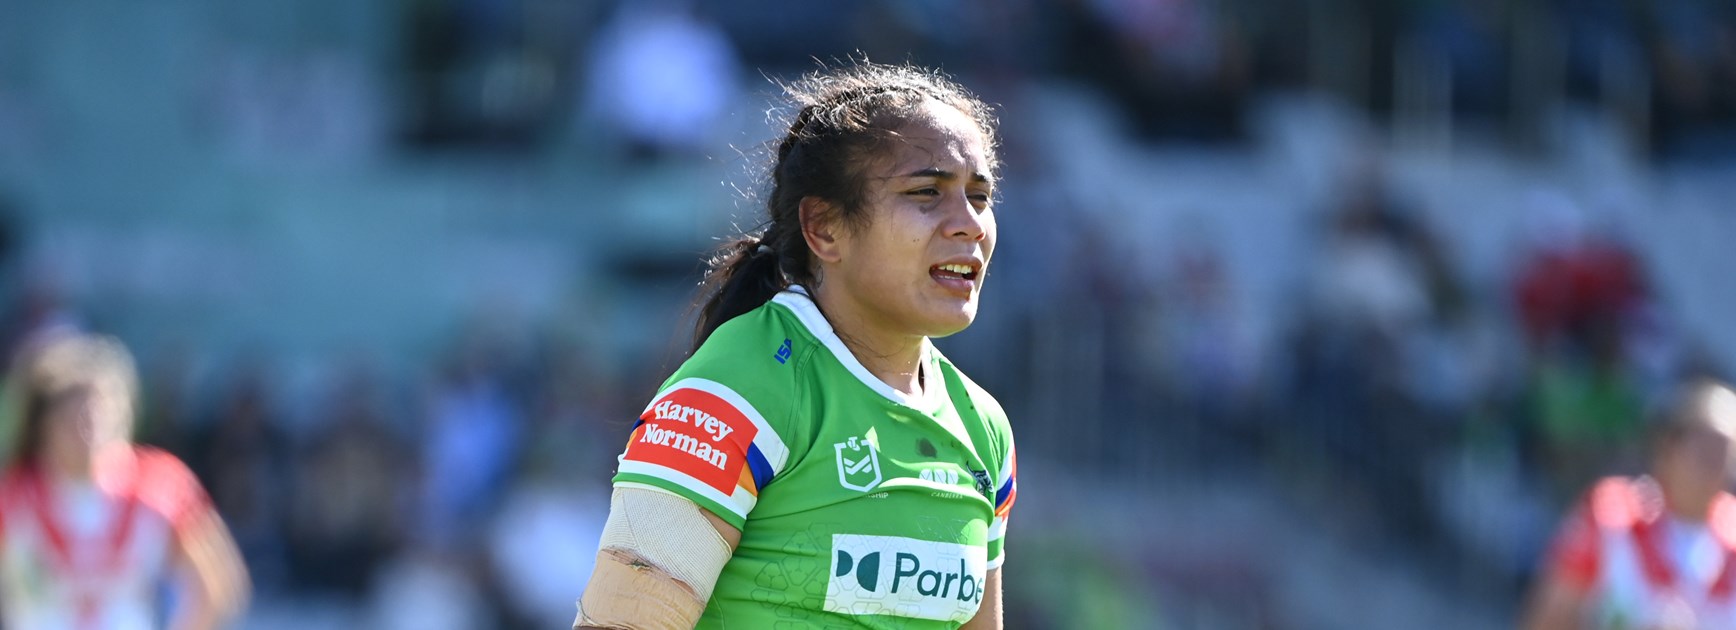 Sky Blues players in the hunt for NRLW Dally M Medal